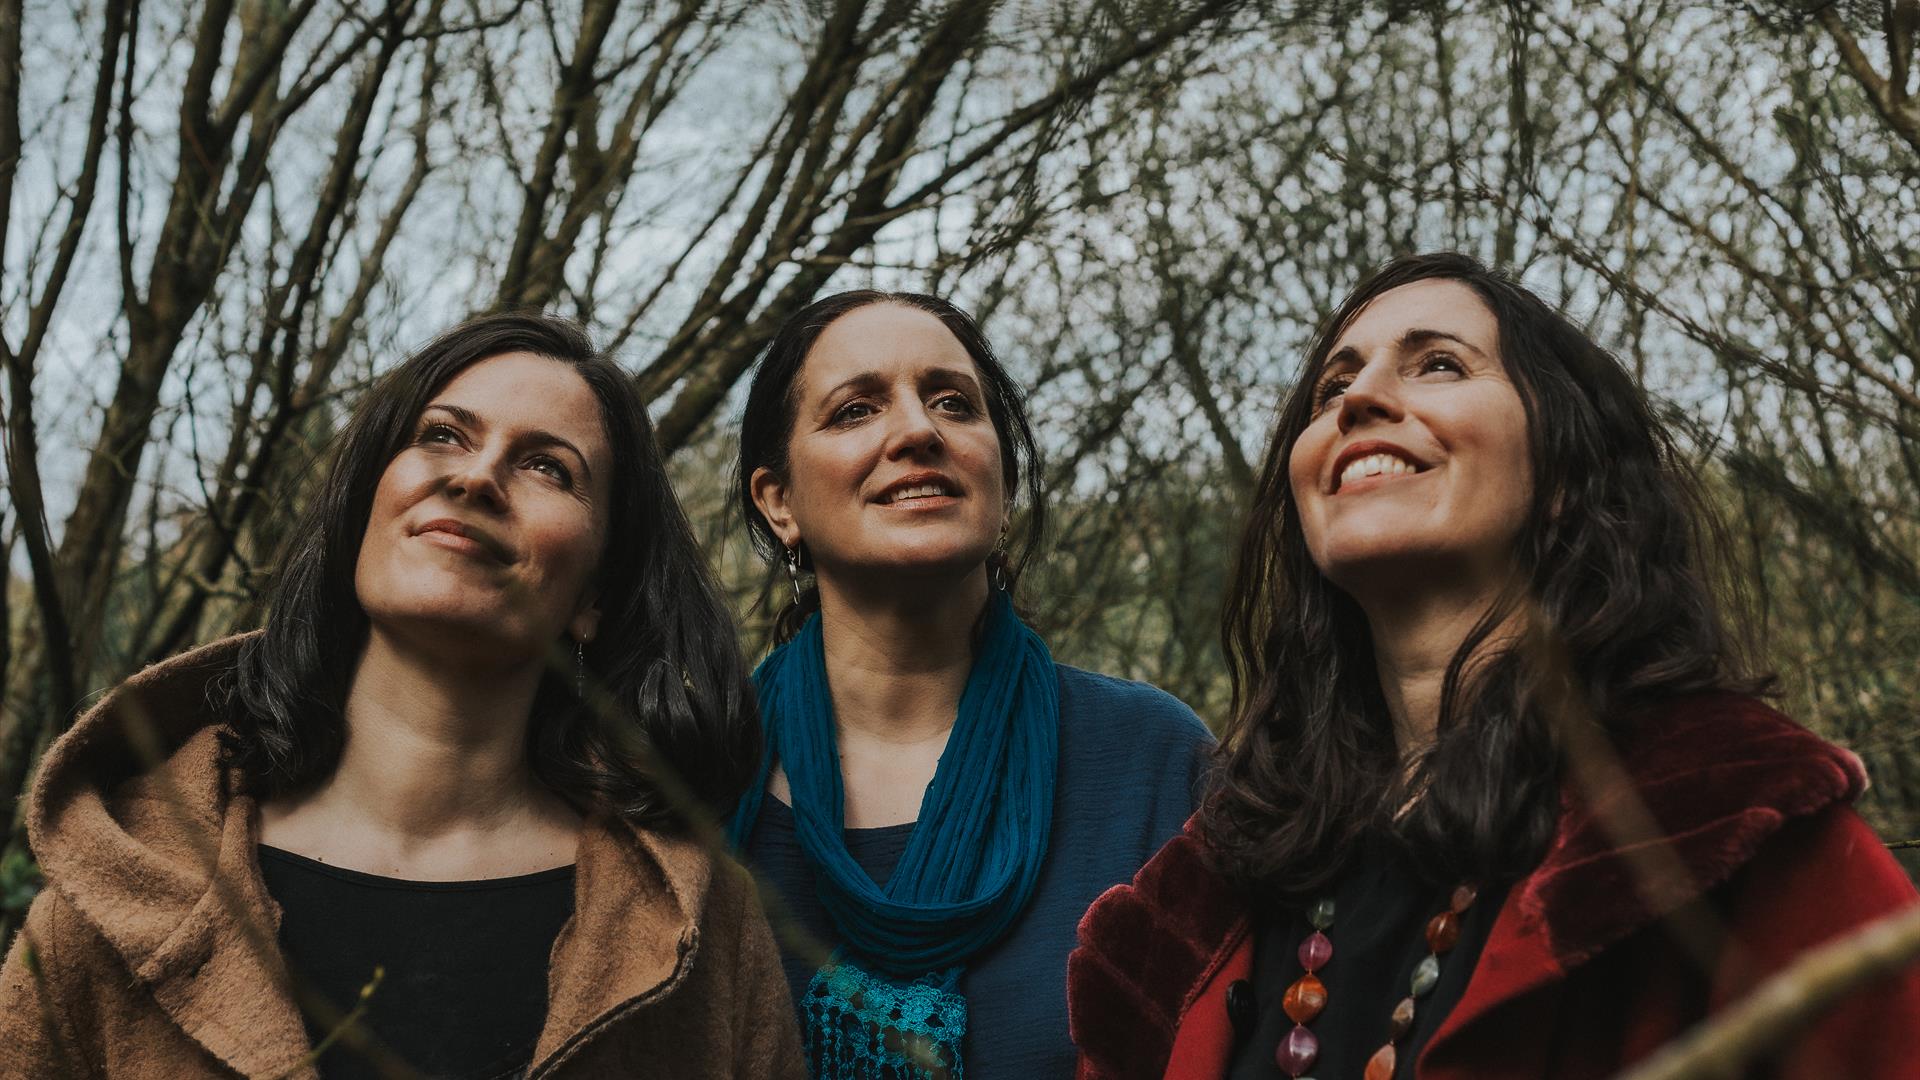 Image shows the Henry Girls, 3 women standing outside all smiling and looking upwards.